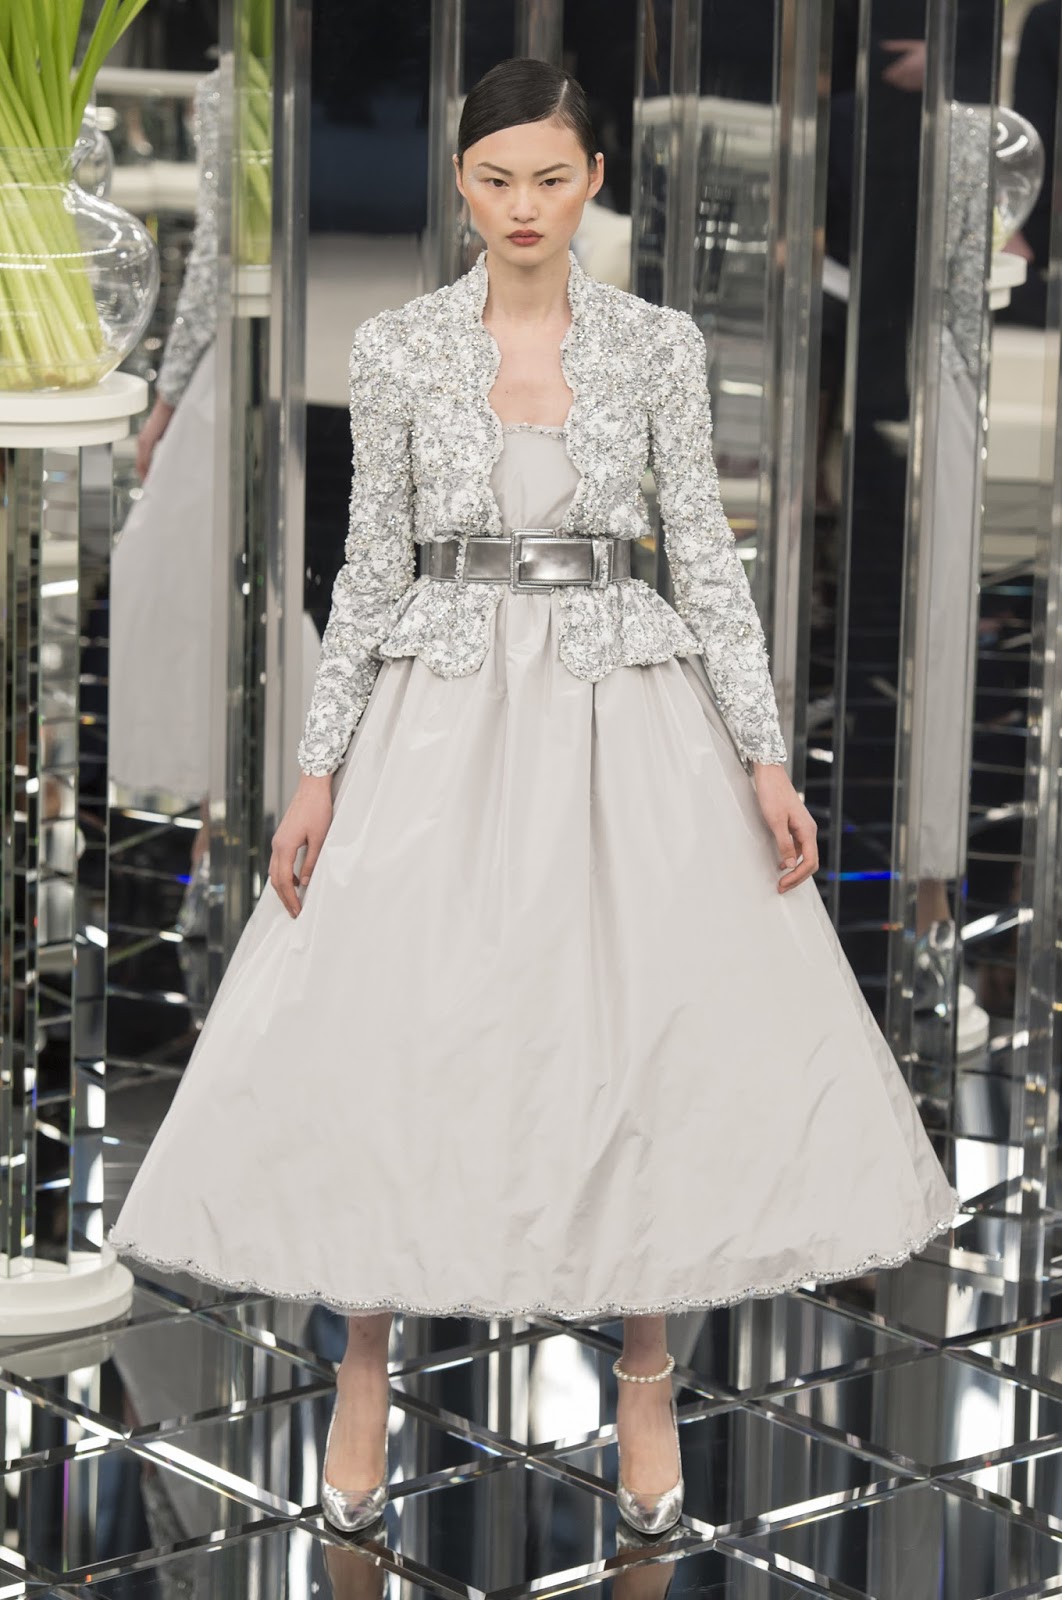 CHANEL: SIMPLY STUNNING